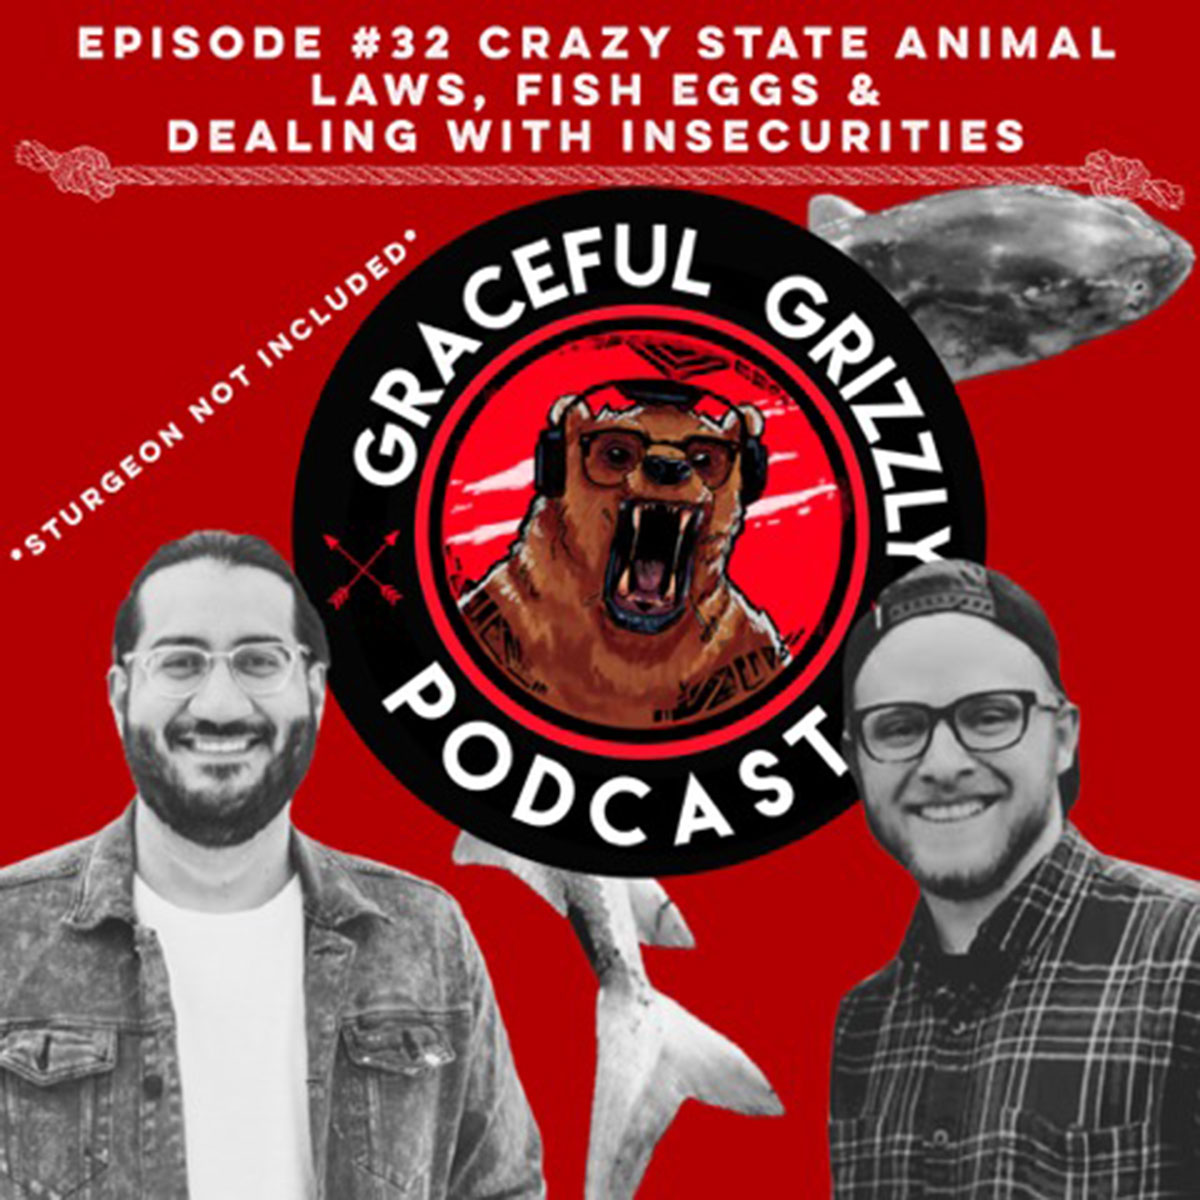 Episode 32 - Graceful Grizzly Podcast